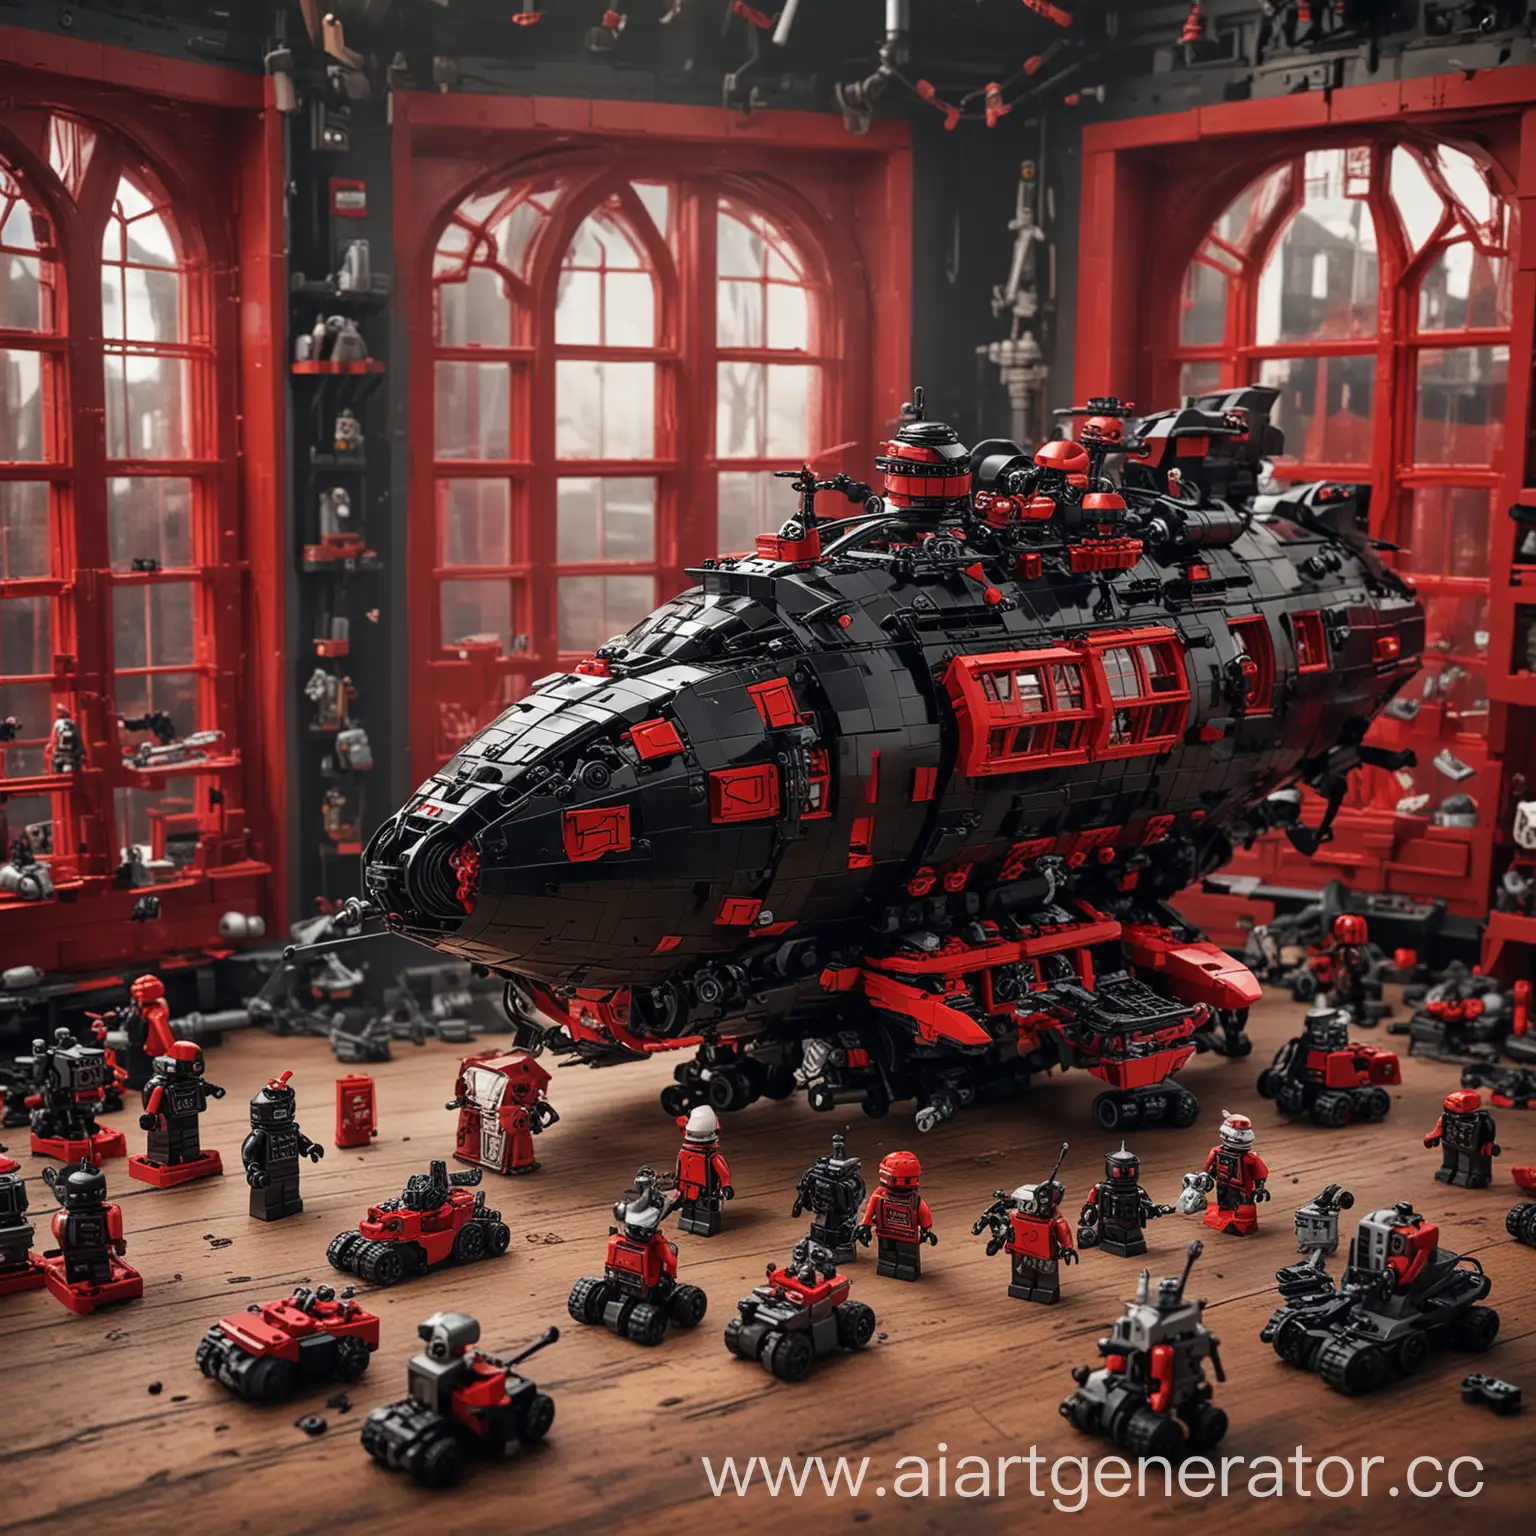 Black-Airship-Lego-Set-with-Red-Windows-Surrounded-by-Robots